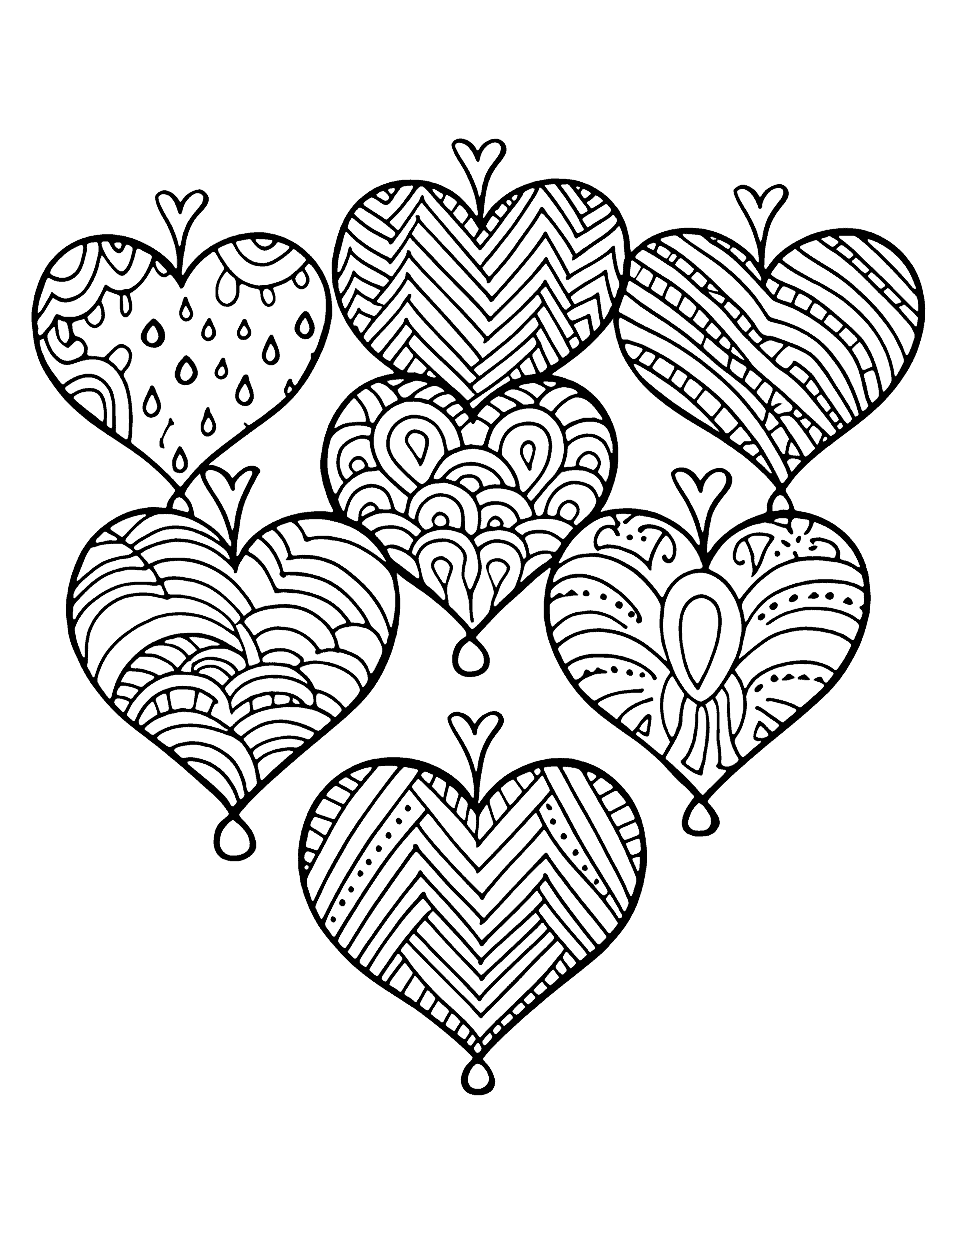 Valentine Cards Heart Coloring Page - Kids can color their own Valentine’s Day cards with heart designs.